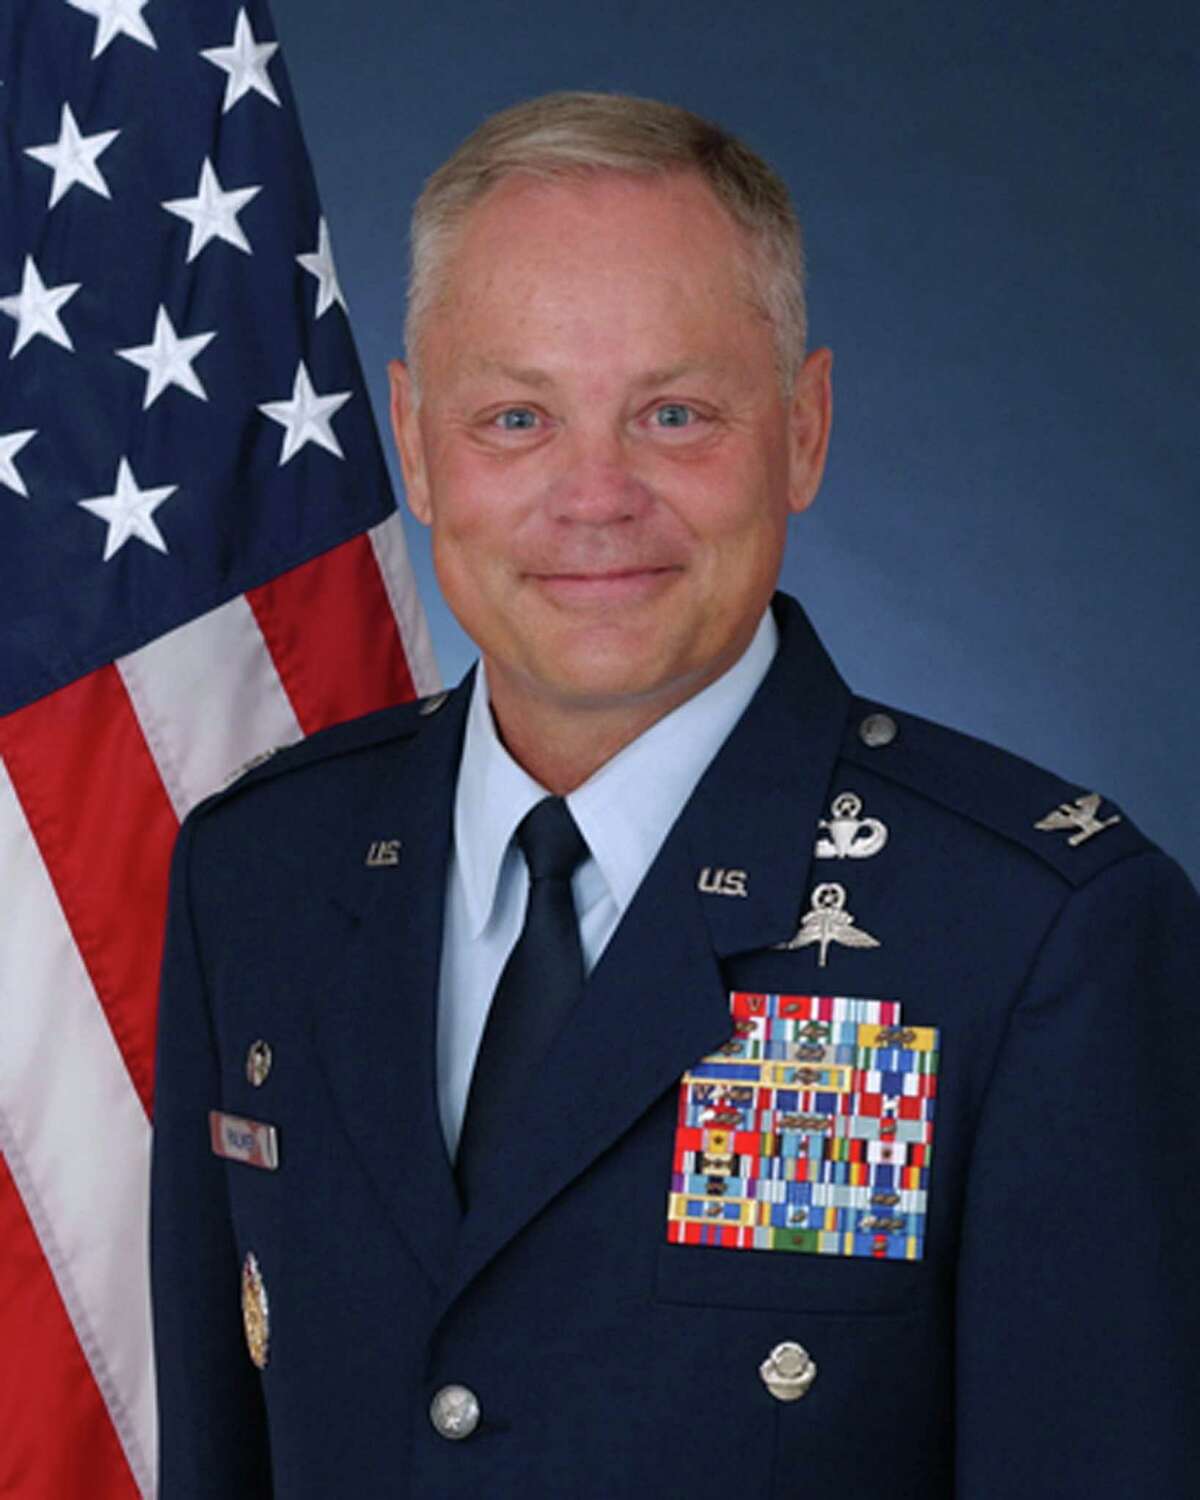 Air Force training commander amid Lackland sex scandal image